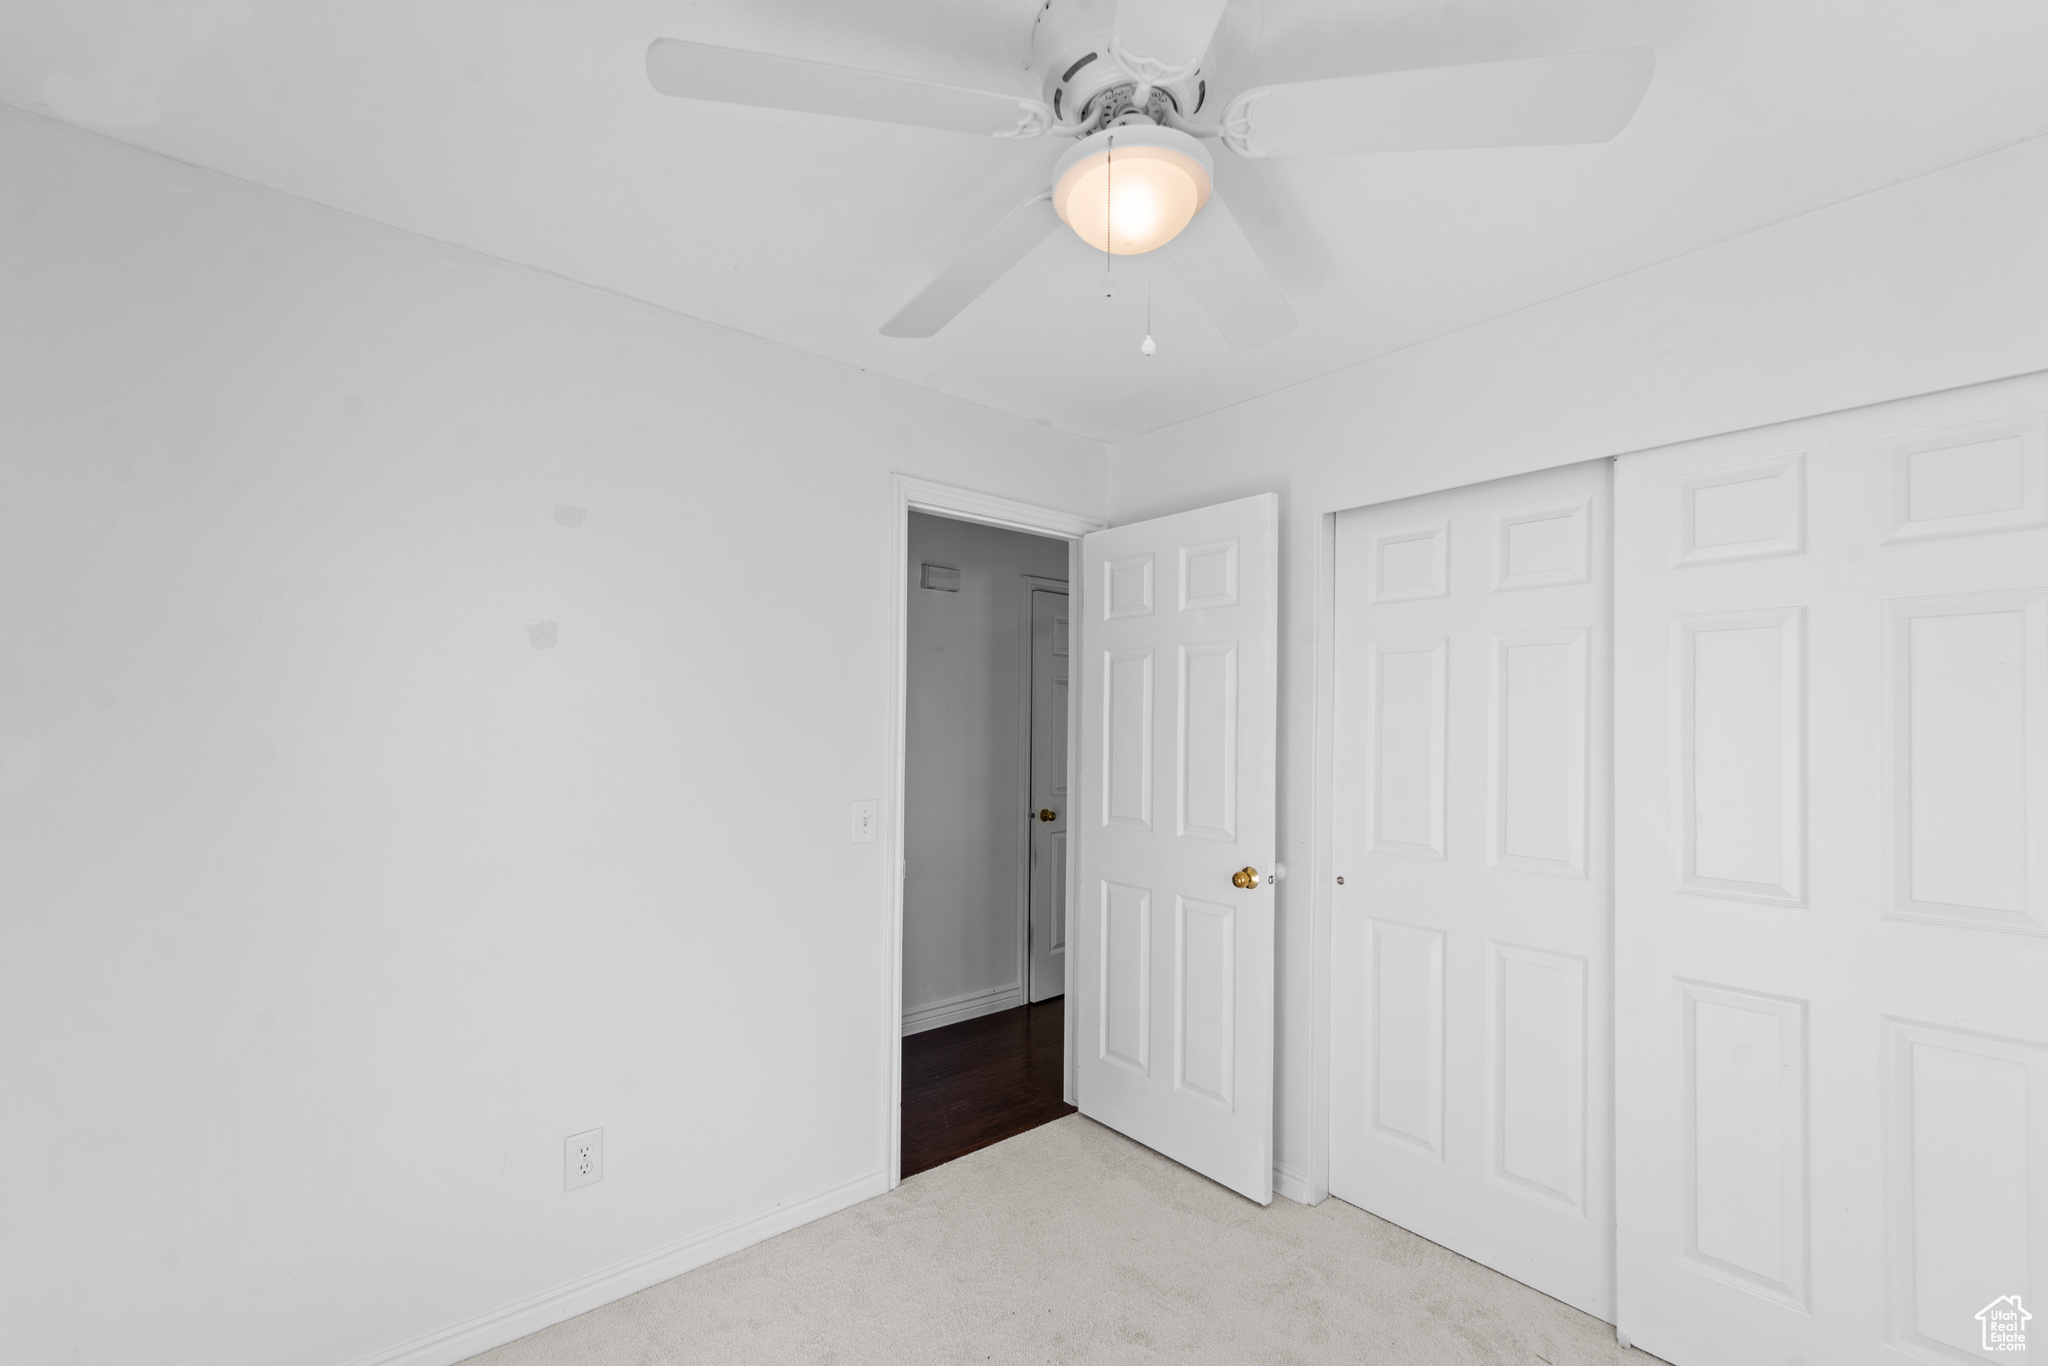 Second bedroom with light carpet, ceiling fan, and a closet